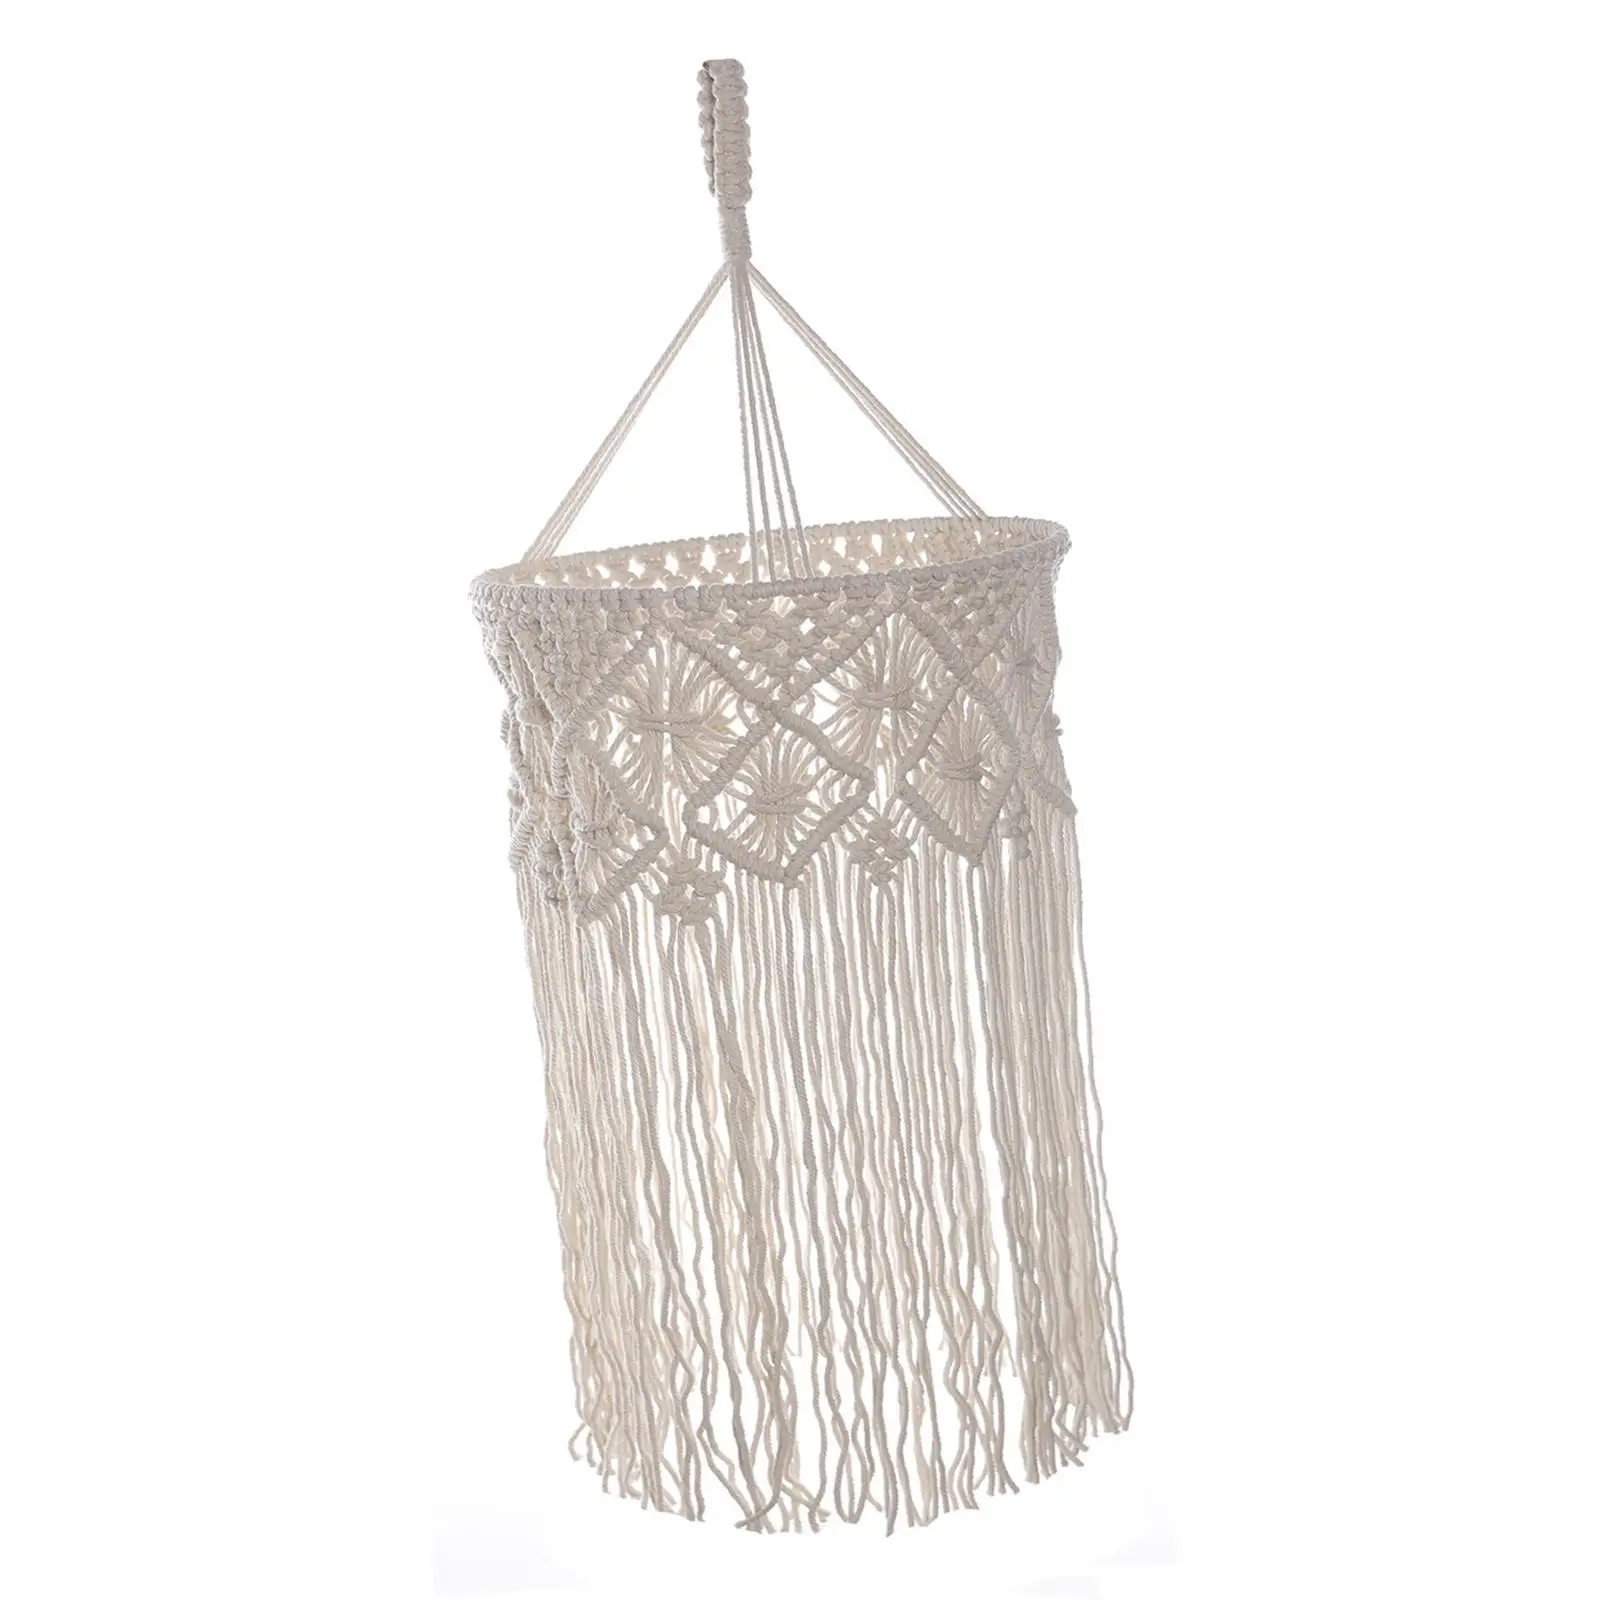 Handwoven Light Shade Pendant Light Cover Macrame Hanging Lamp Shade Boho Lampshade for Hotel Cafe Teahouse Office Dorm Room